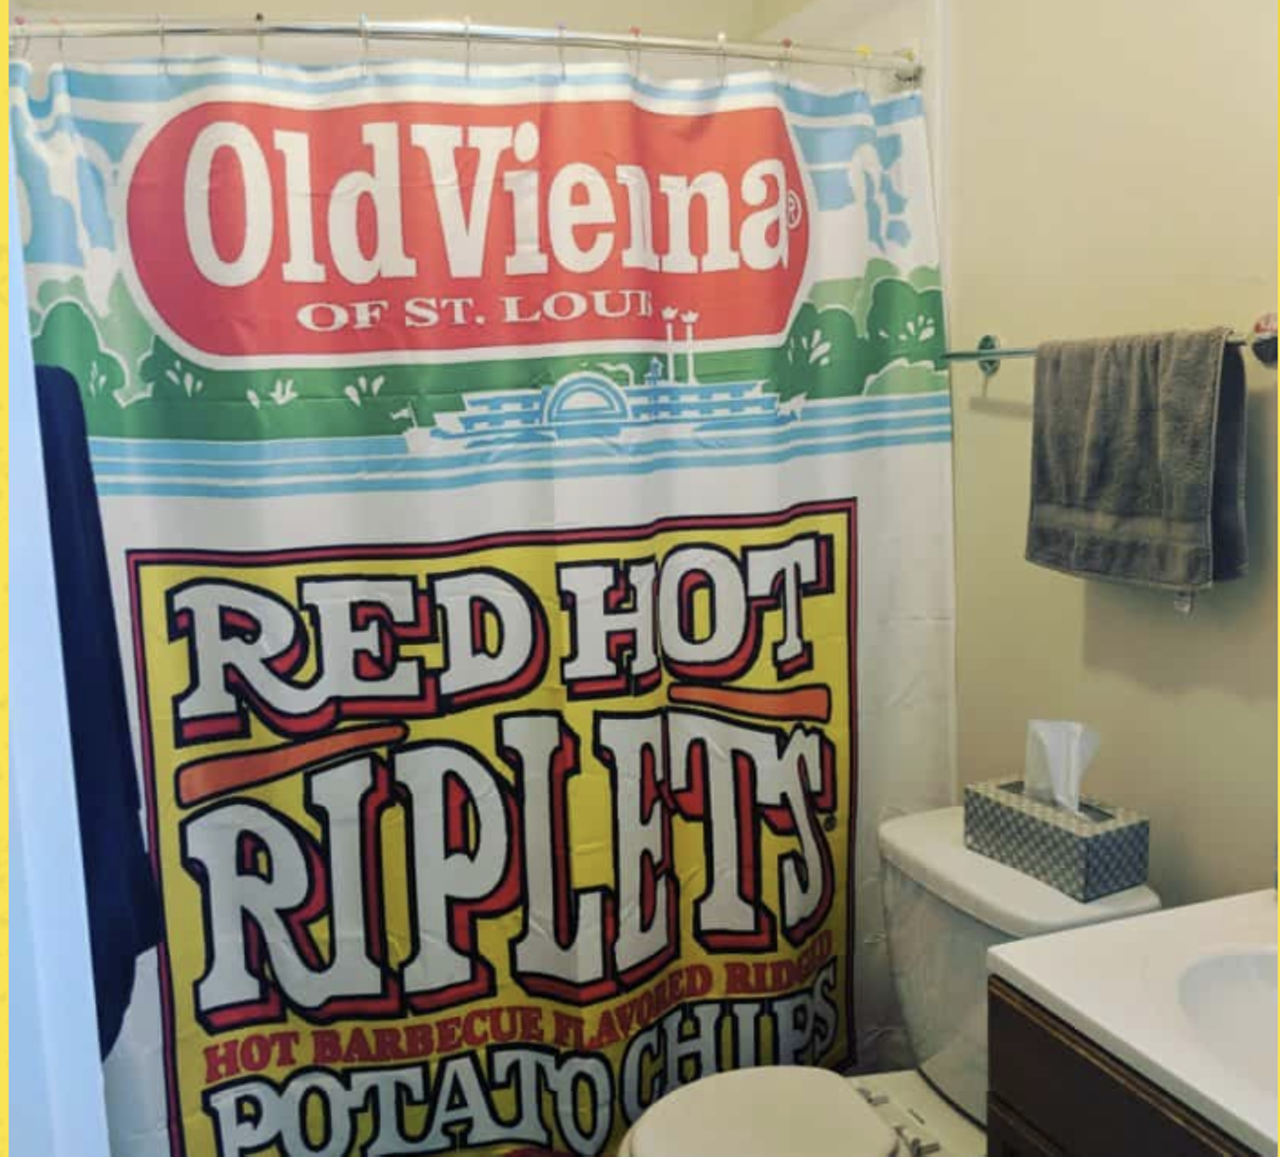 A Red Hot Riplets shower curtain
Purchase for $60 online
Anybody can use a few bags of St. Louis’ favorite snack chip as a stocking stuffer, but it takes a giver both generous and genial to get their friends a Red Hot Riplets  shower curtain. You know you want to be that friend. This is your year to shine. (You can also buy a Red Hot Riplets flag if you prefer to let your taste in snack chips fly.)